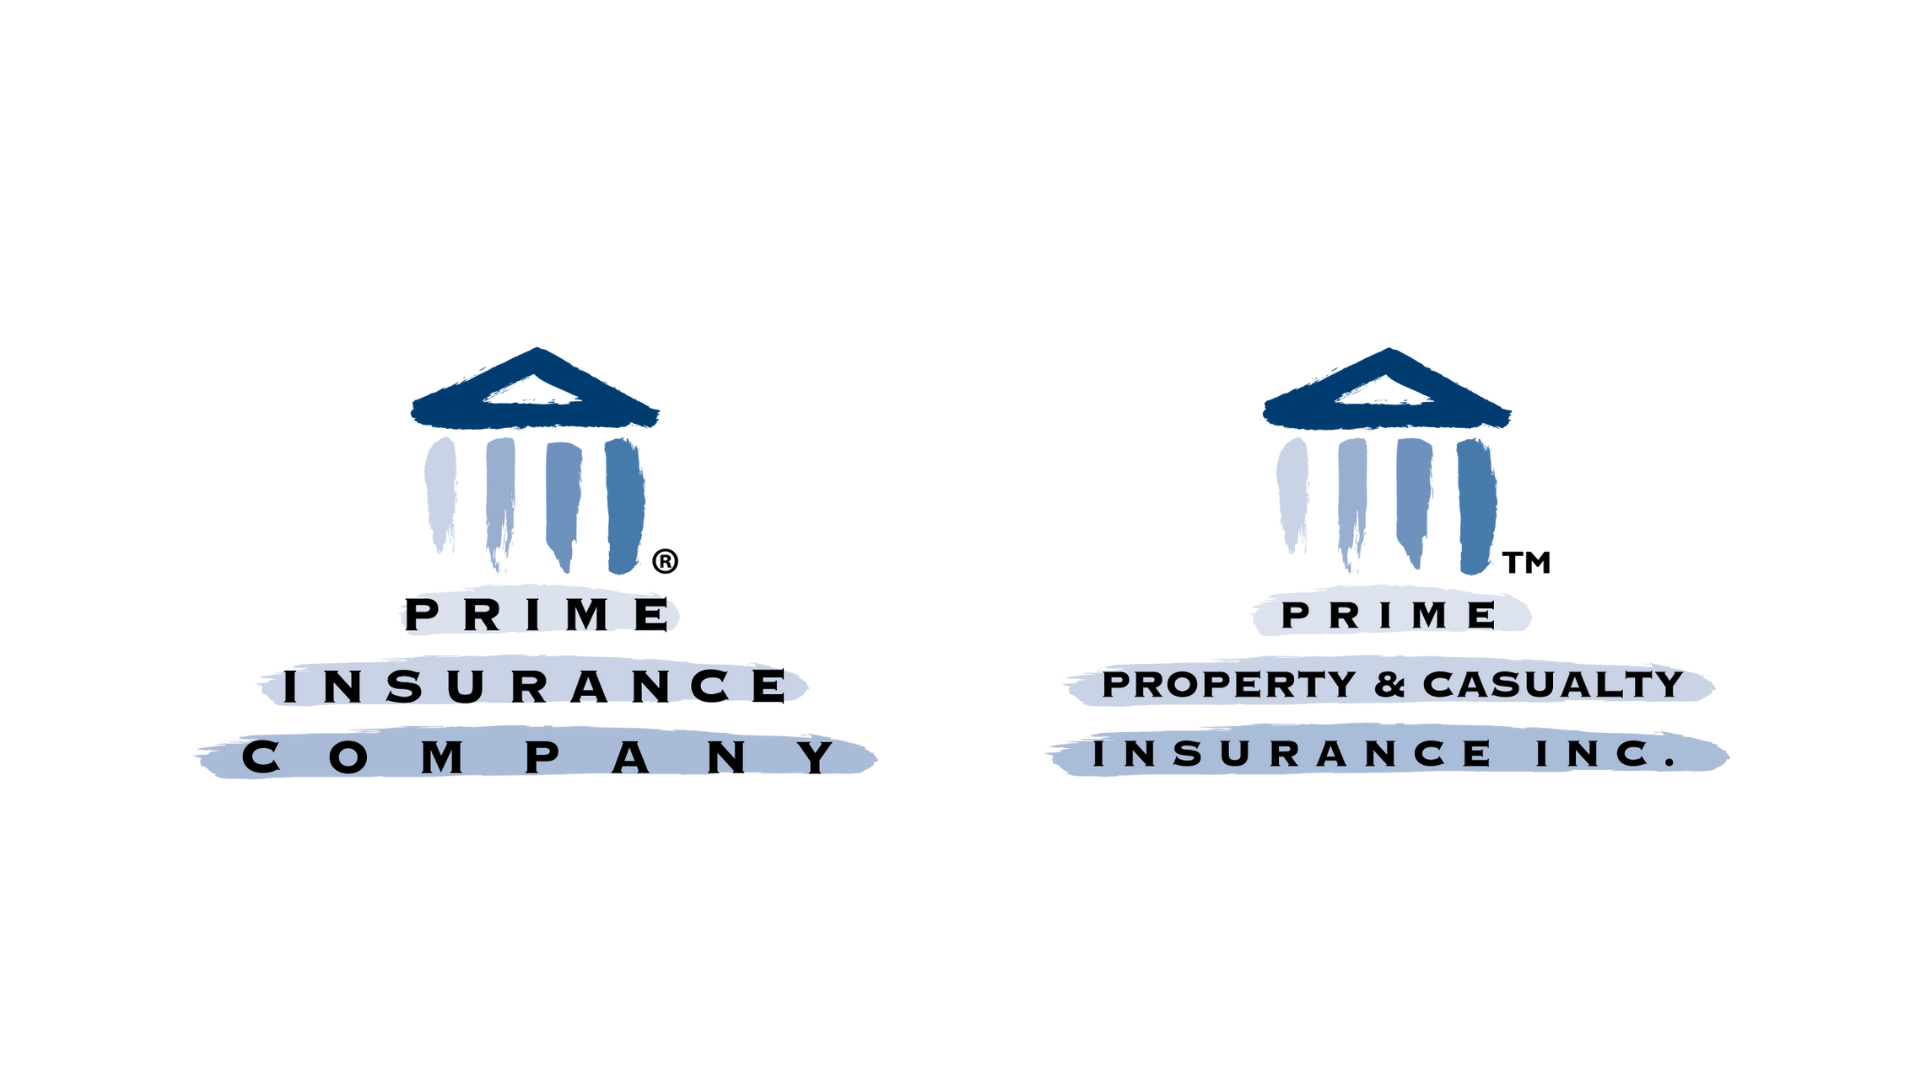 Prime Insurance Company and Prime Property and Casualty Insurance Company Inc. Assigned Top Ratings by Demotech, Inc.